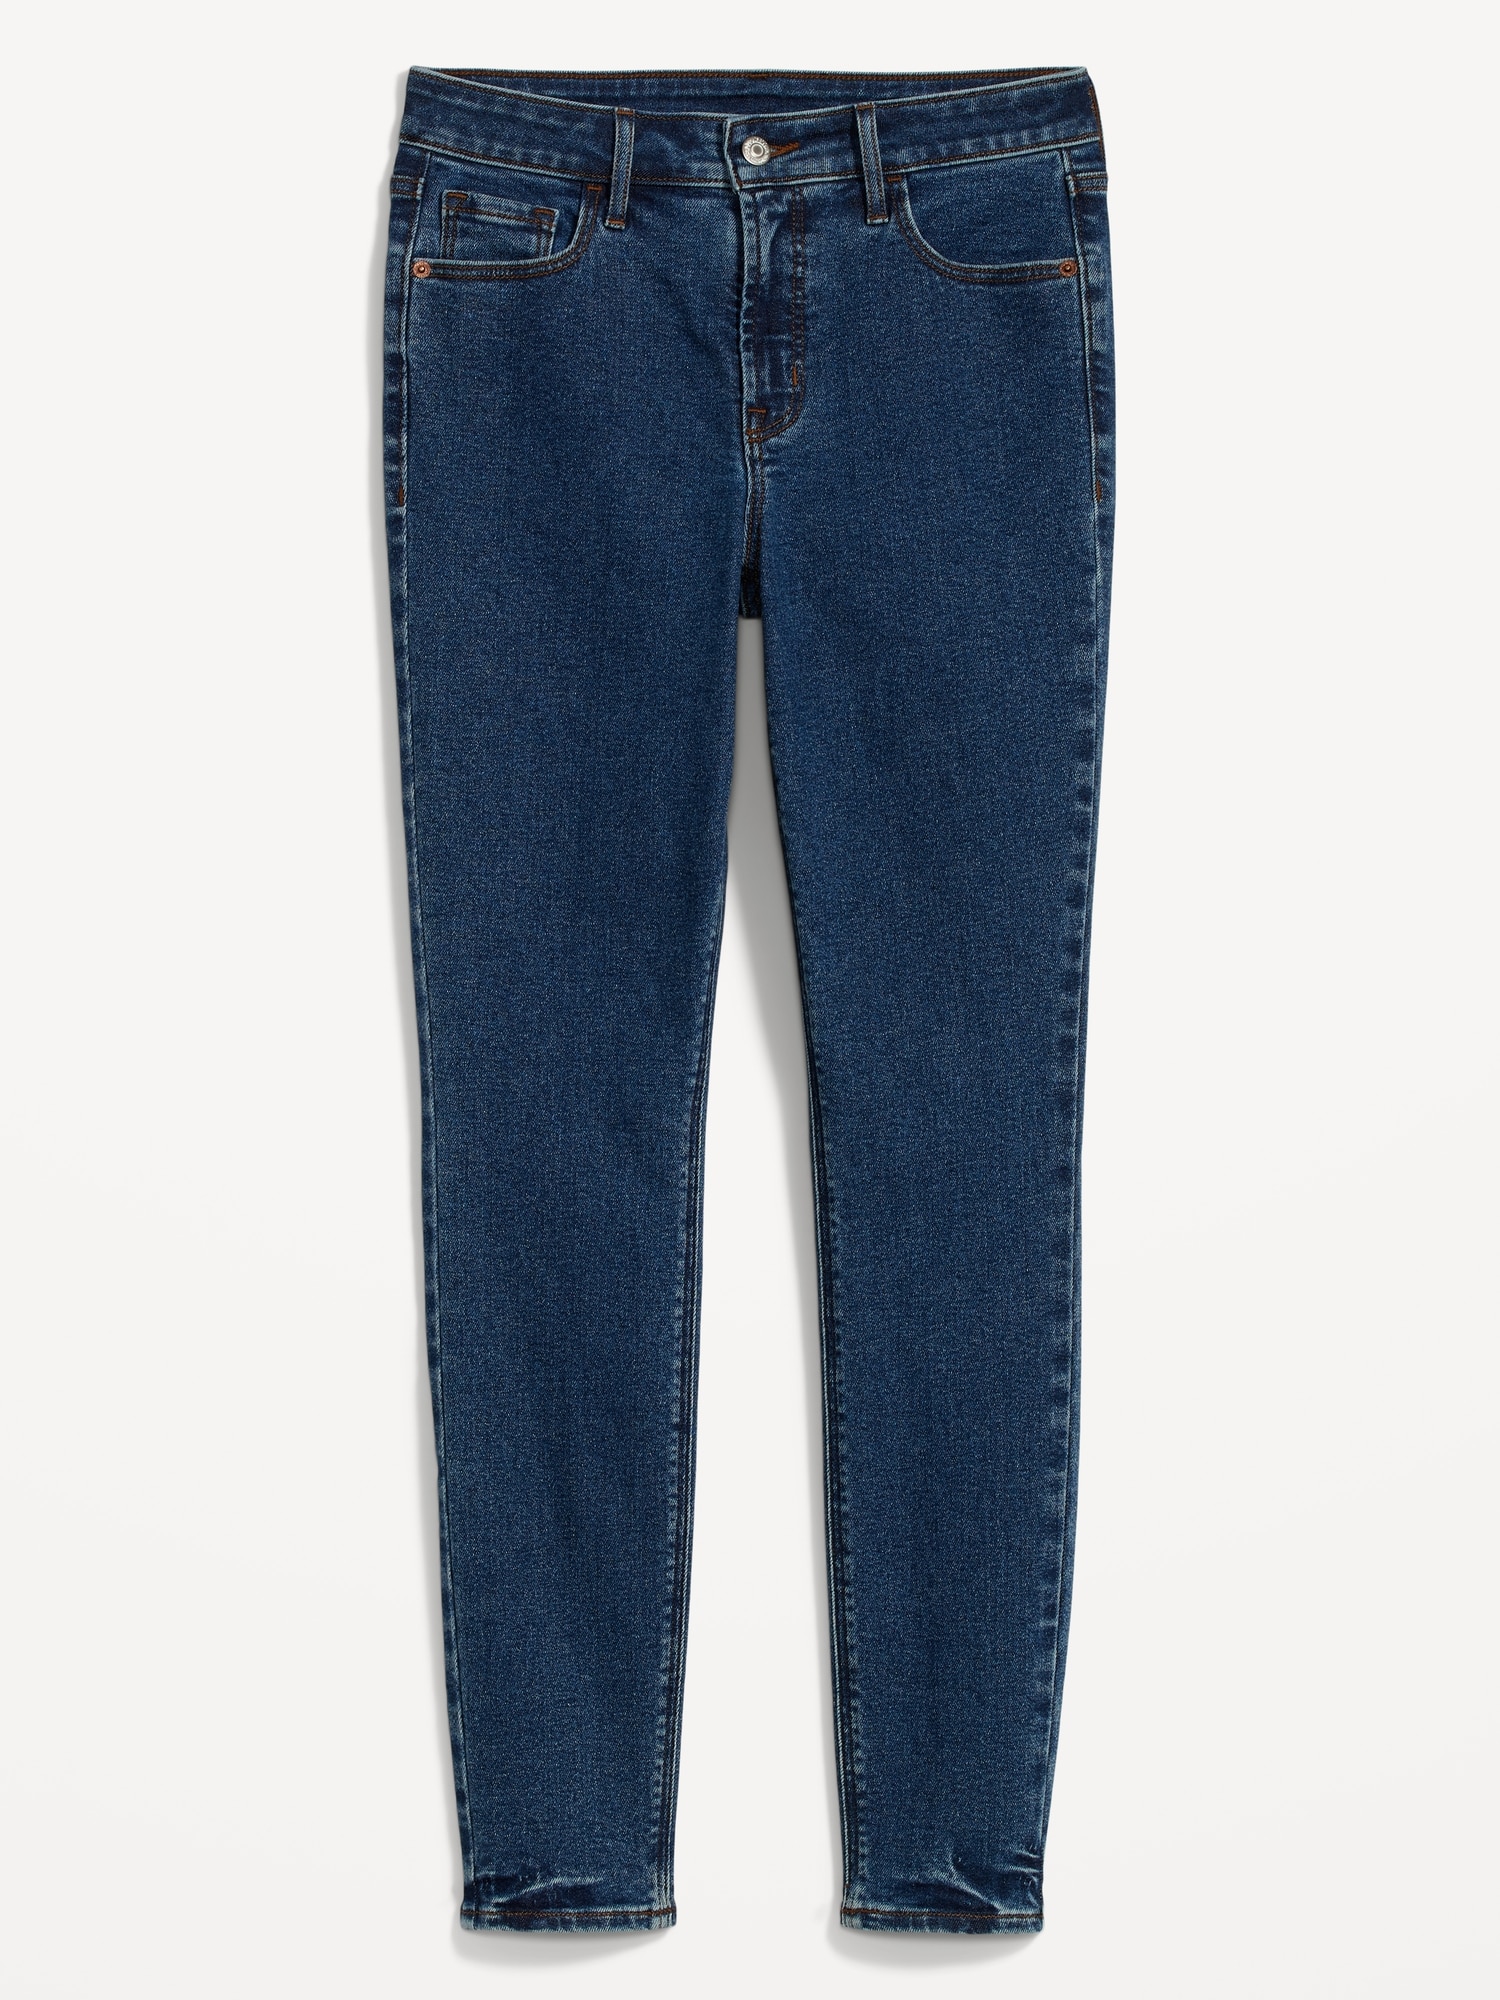 High-Waisted Rockstar Super-Skinny Jeans for Women | Old Navy